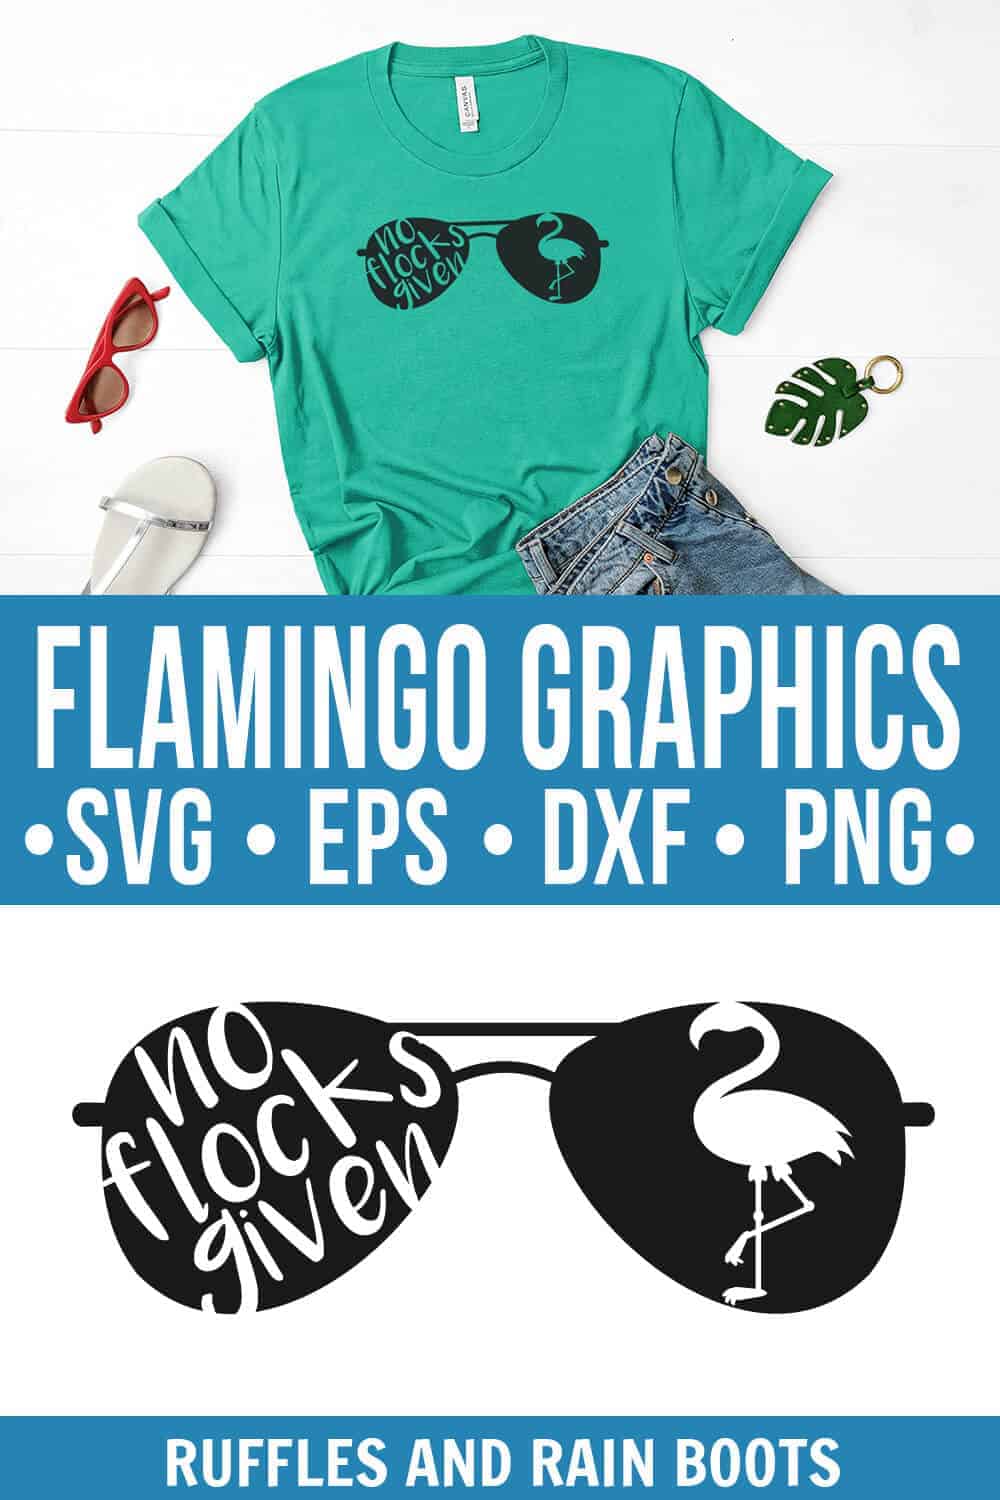 photo collage of flamingo svg for no flocks given cut file with sunglasses flattened with text which reads flamingo graphics svg eps dxf png